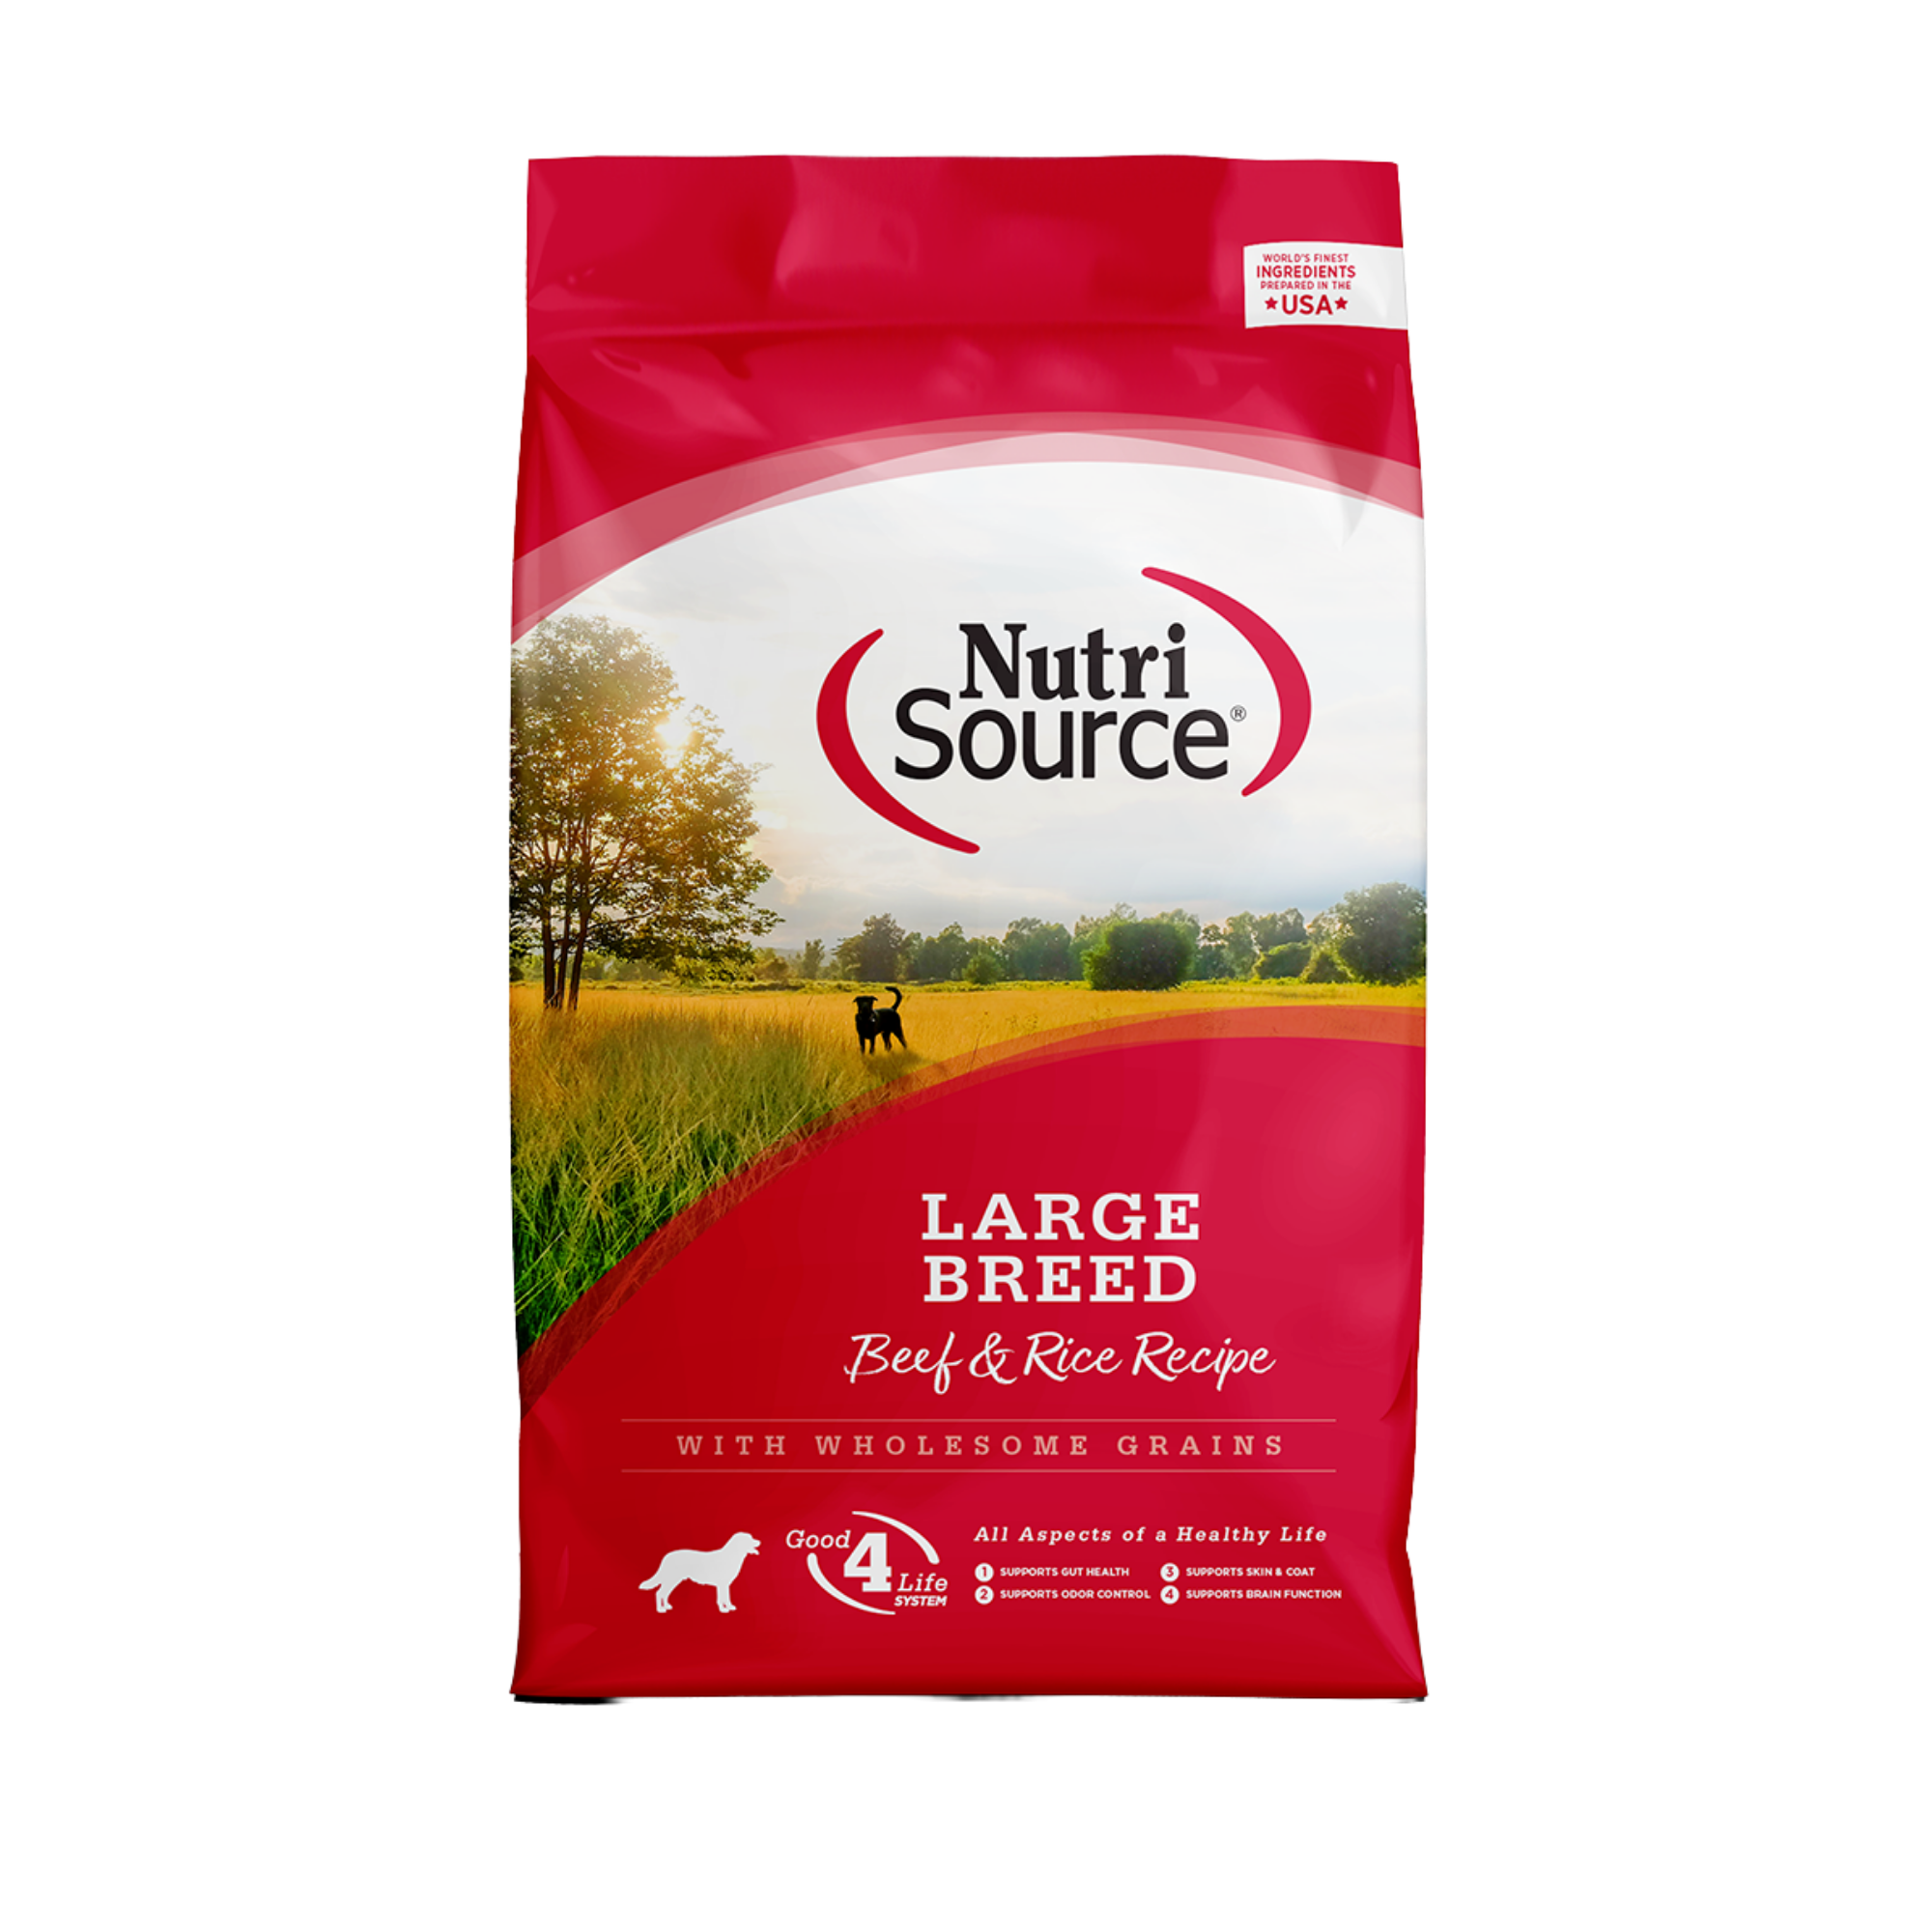 NutriSource Large Breed Adult Beef & Rice Formula Dry Dog Food - Mutts & Co.